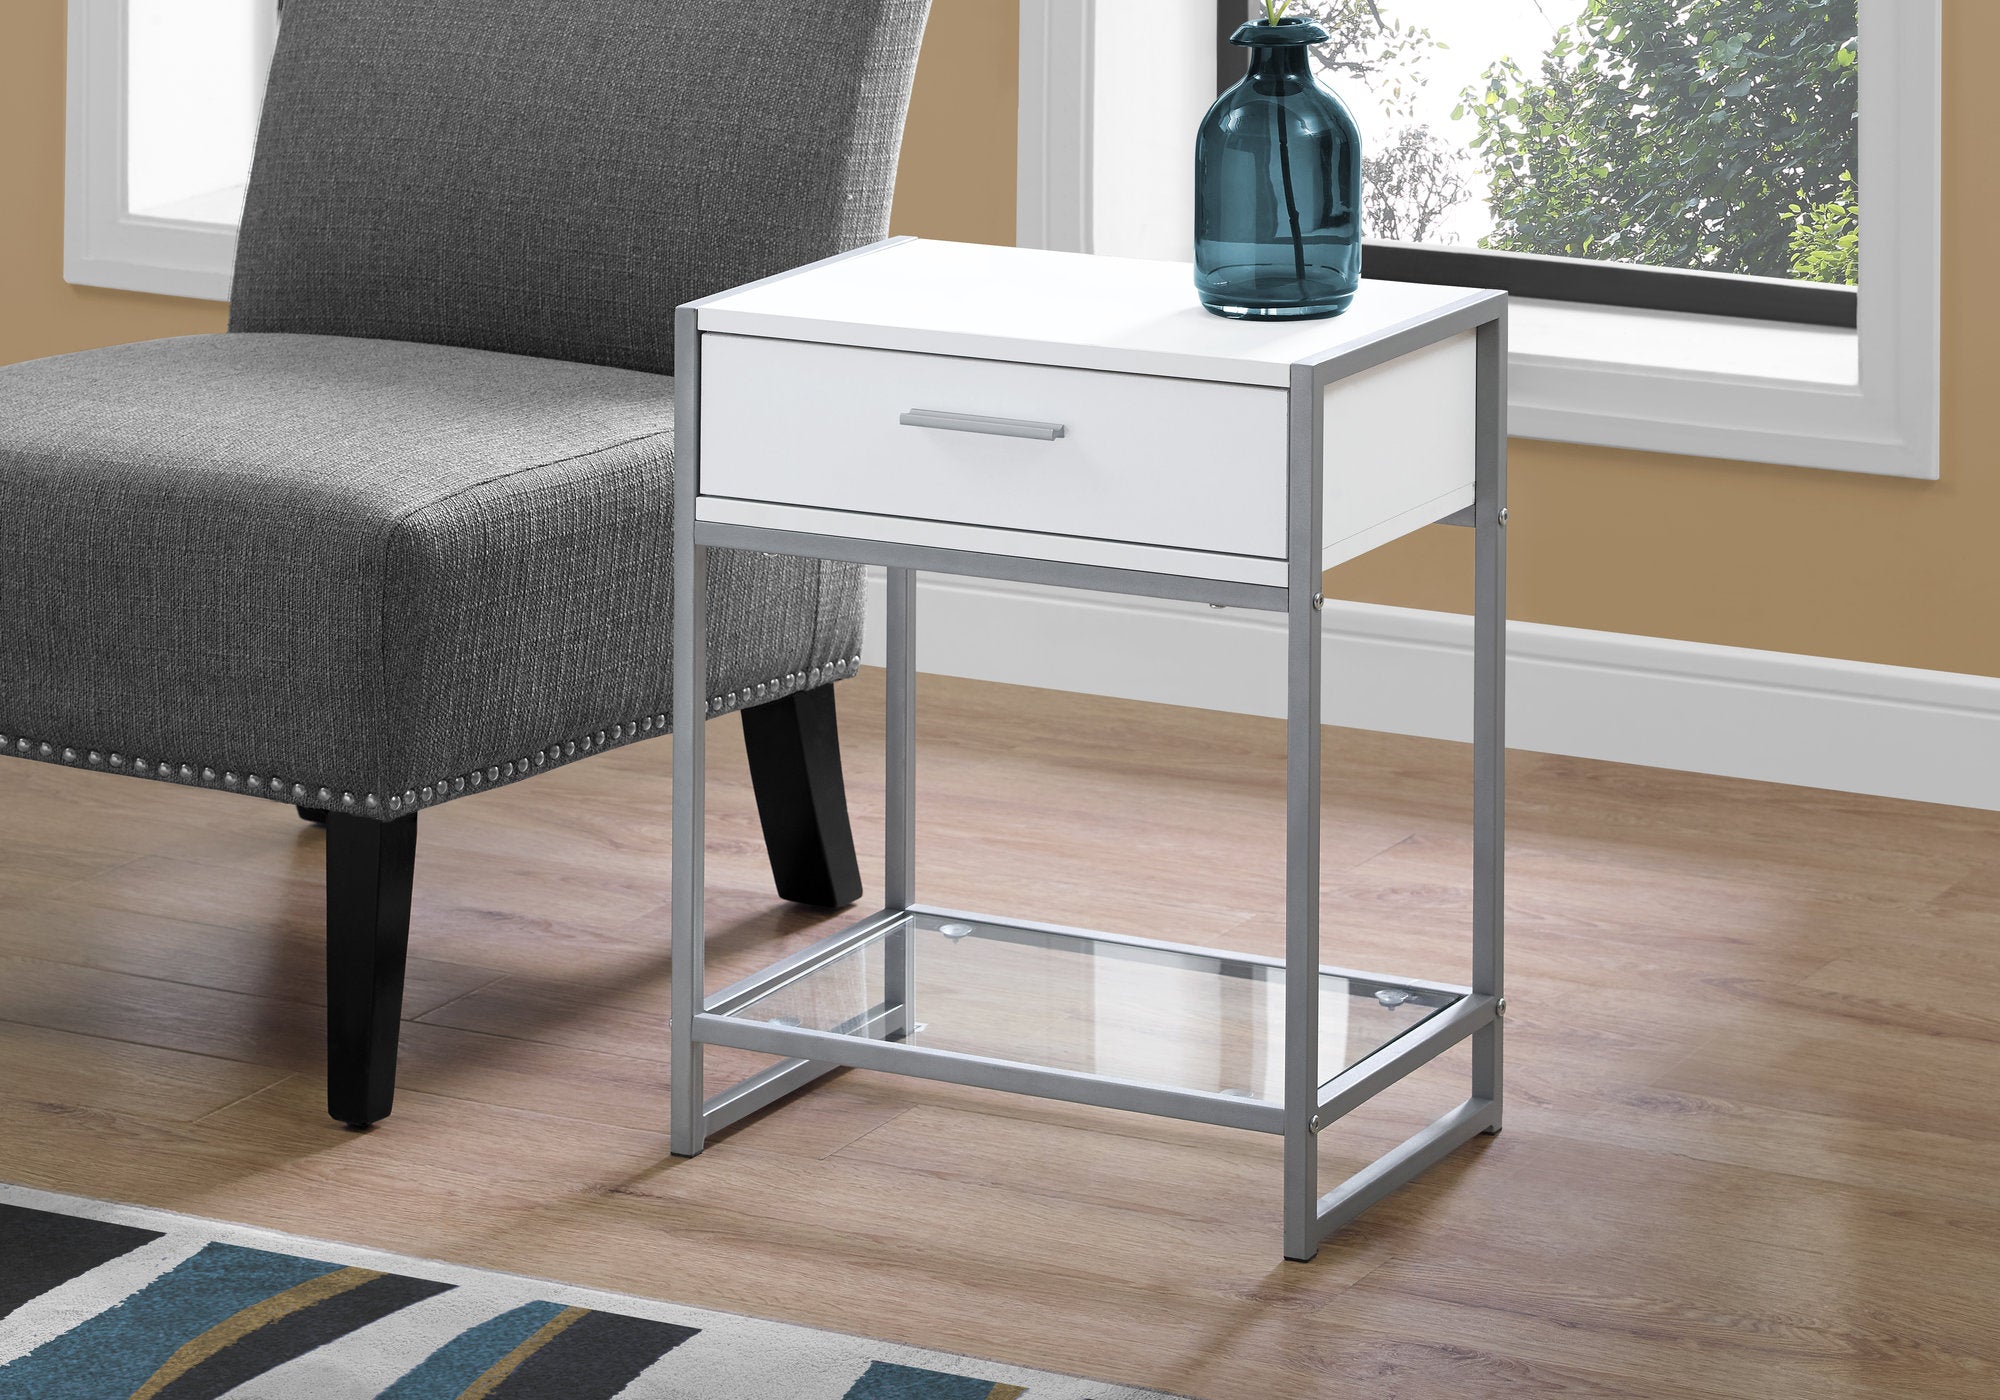 MN-103503    Accent Table, Side, End, Nightstand, Lamp, Living Room, Bedroom, Metal Legs, Tempered Glass And Laminate, White, Grey, Contemporary, Modern